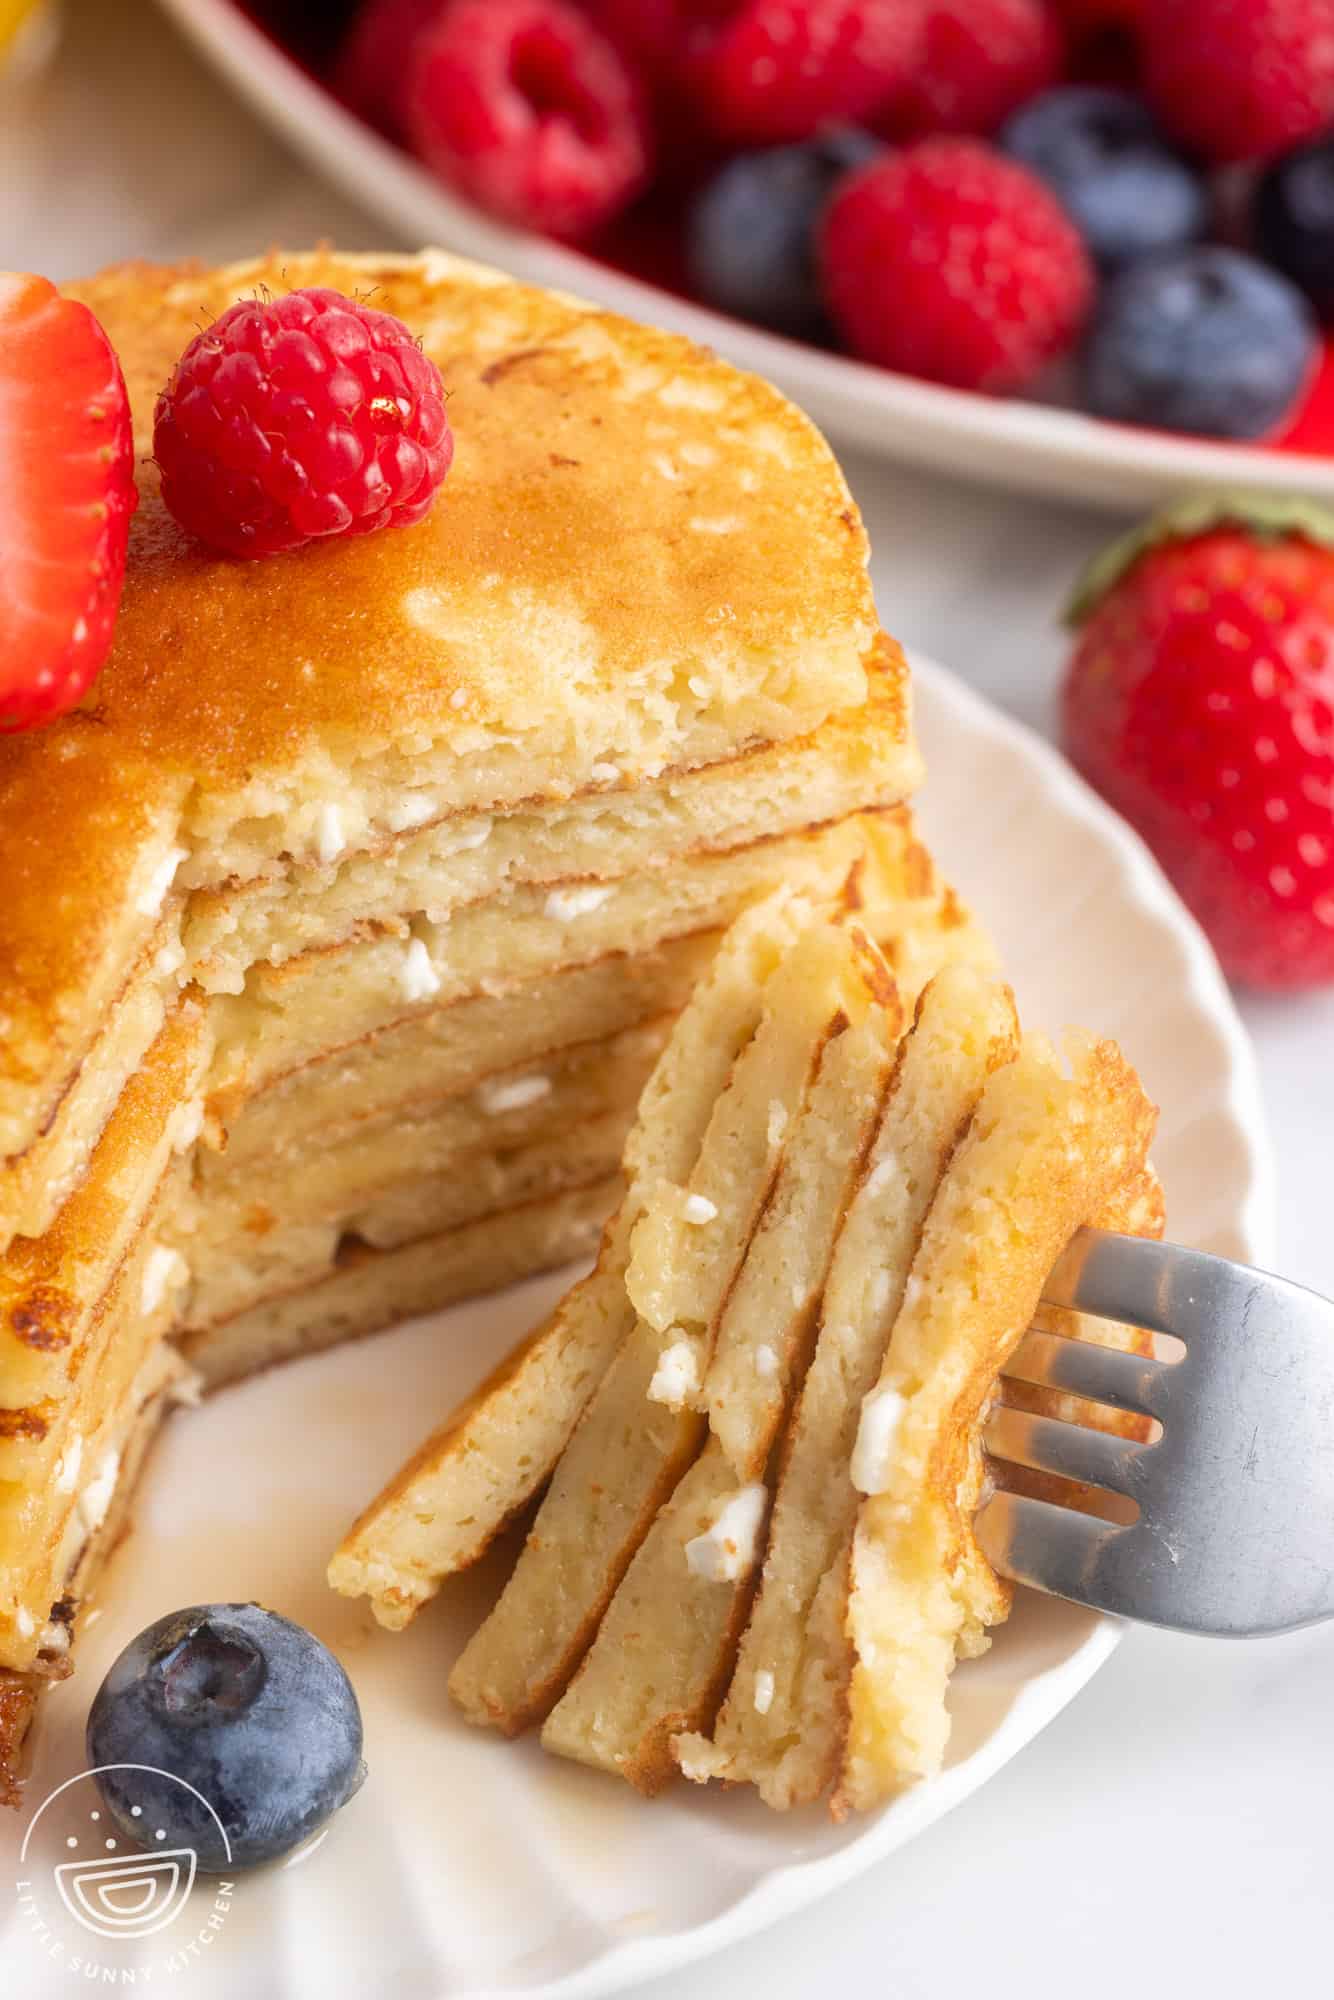 A stack of seven cottage cheese pancakes. The stack has been cut and a fork is holding a bite. On top of the stack is fresh berries and syrup.